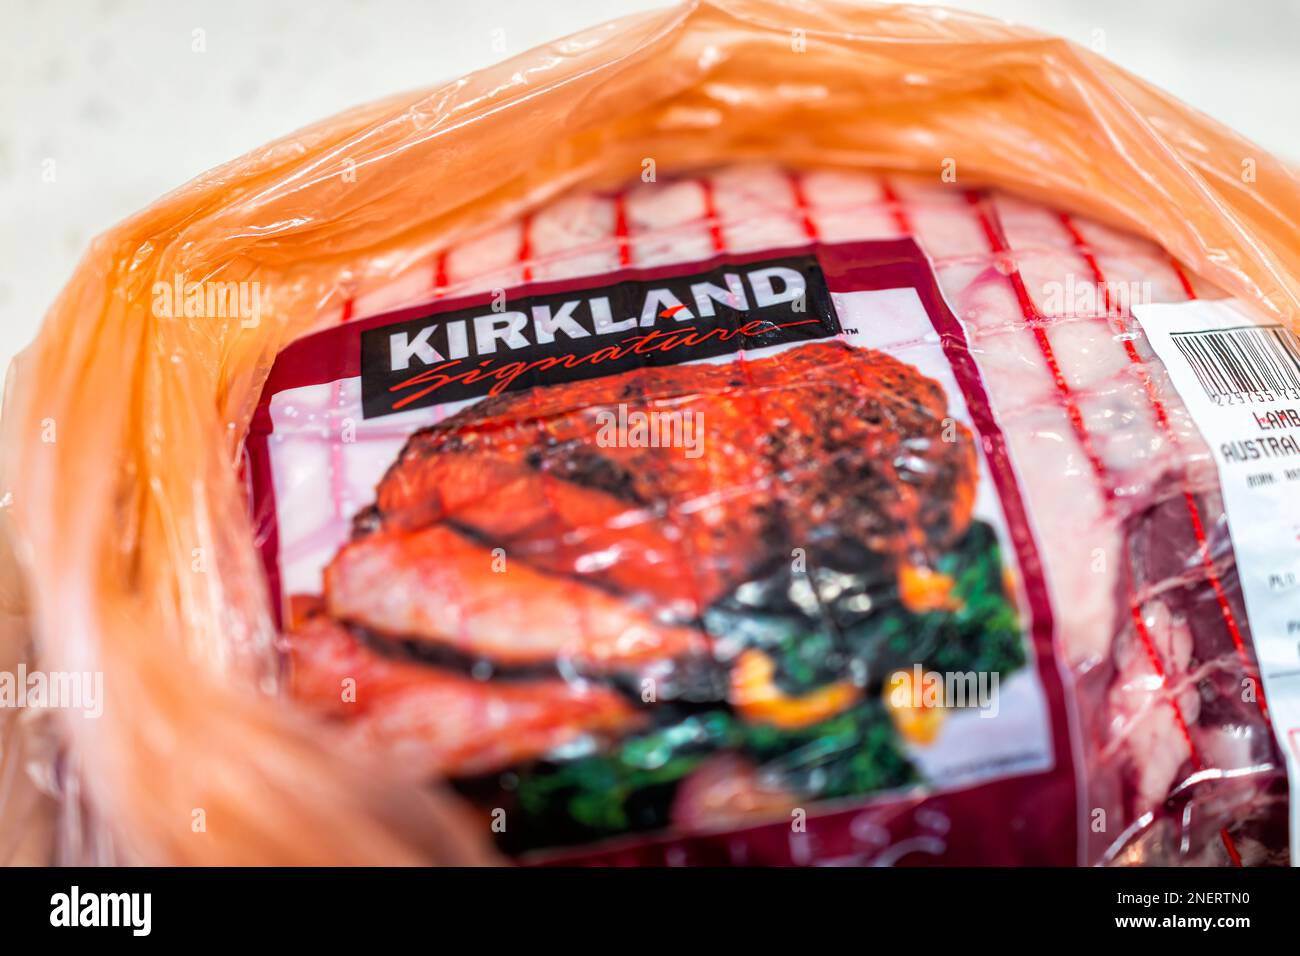 Naples, USA - February 22, 2022: Lamb boneless leg meat mutton by Costco Kirkland signature private label brand in plastic bag, raw uncooked food Stock Photo